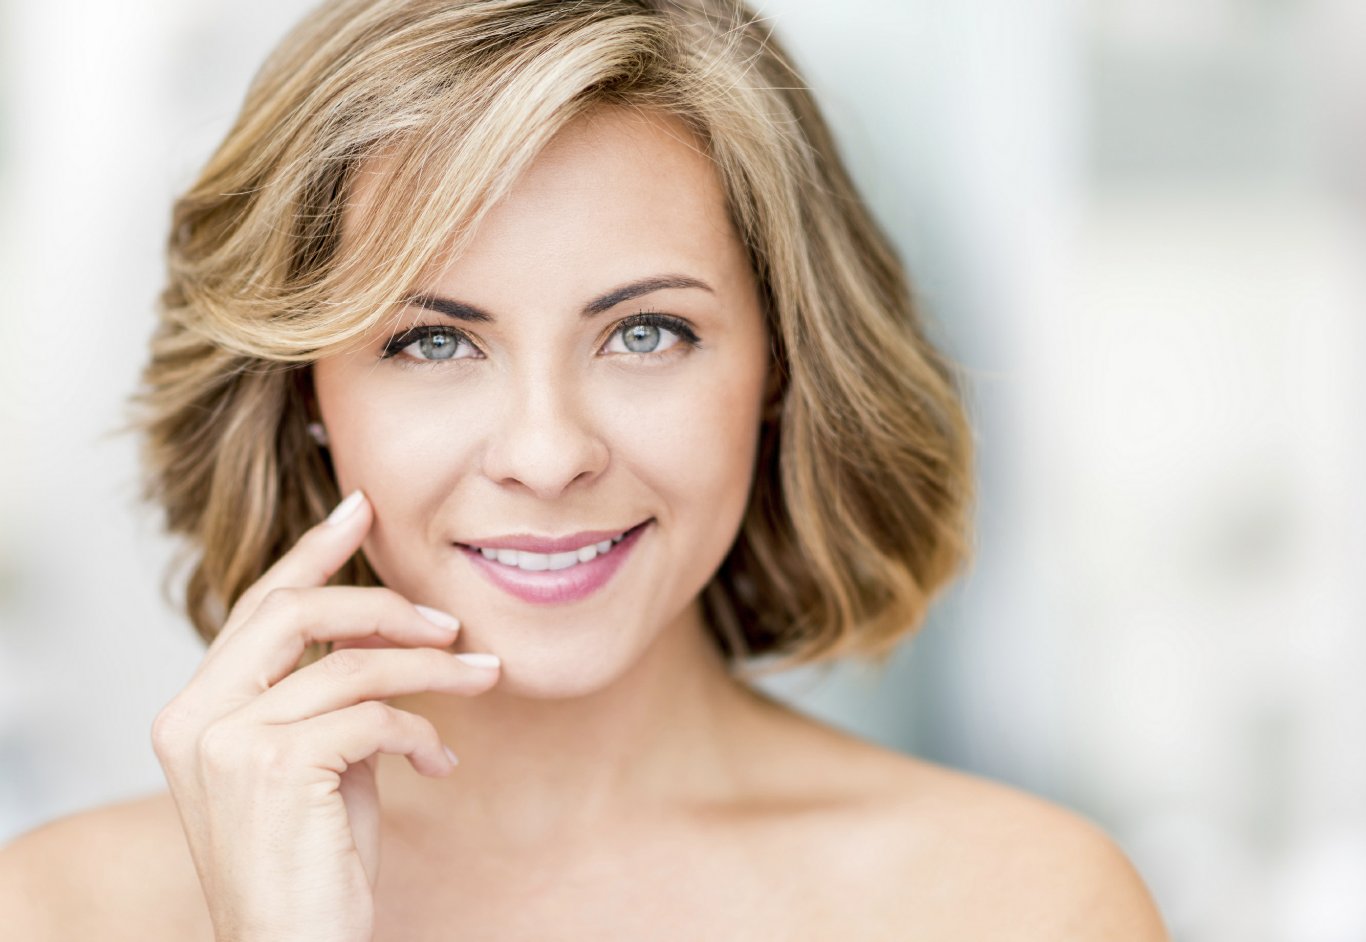 To learn if facelift surgery can help you reach your goals, call Greenwood plastic surgeon Dr. Ted Vaughn at 864-223-0505 and schedule a consultation today